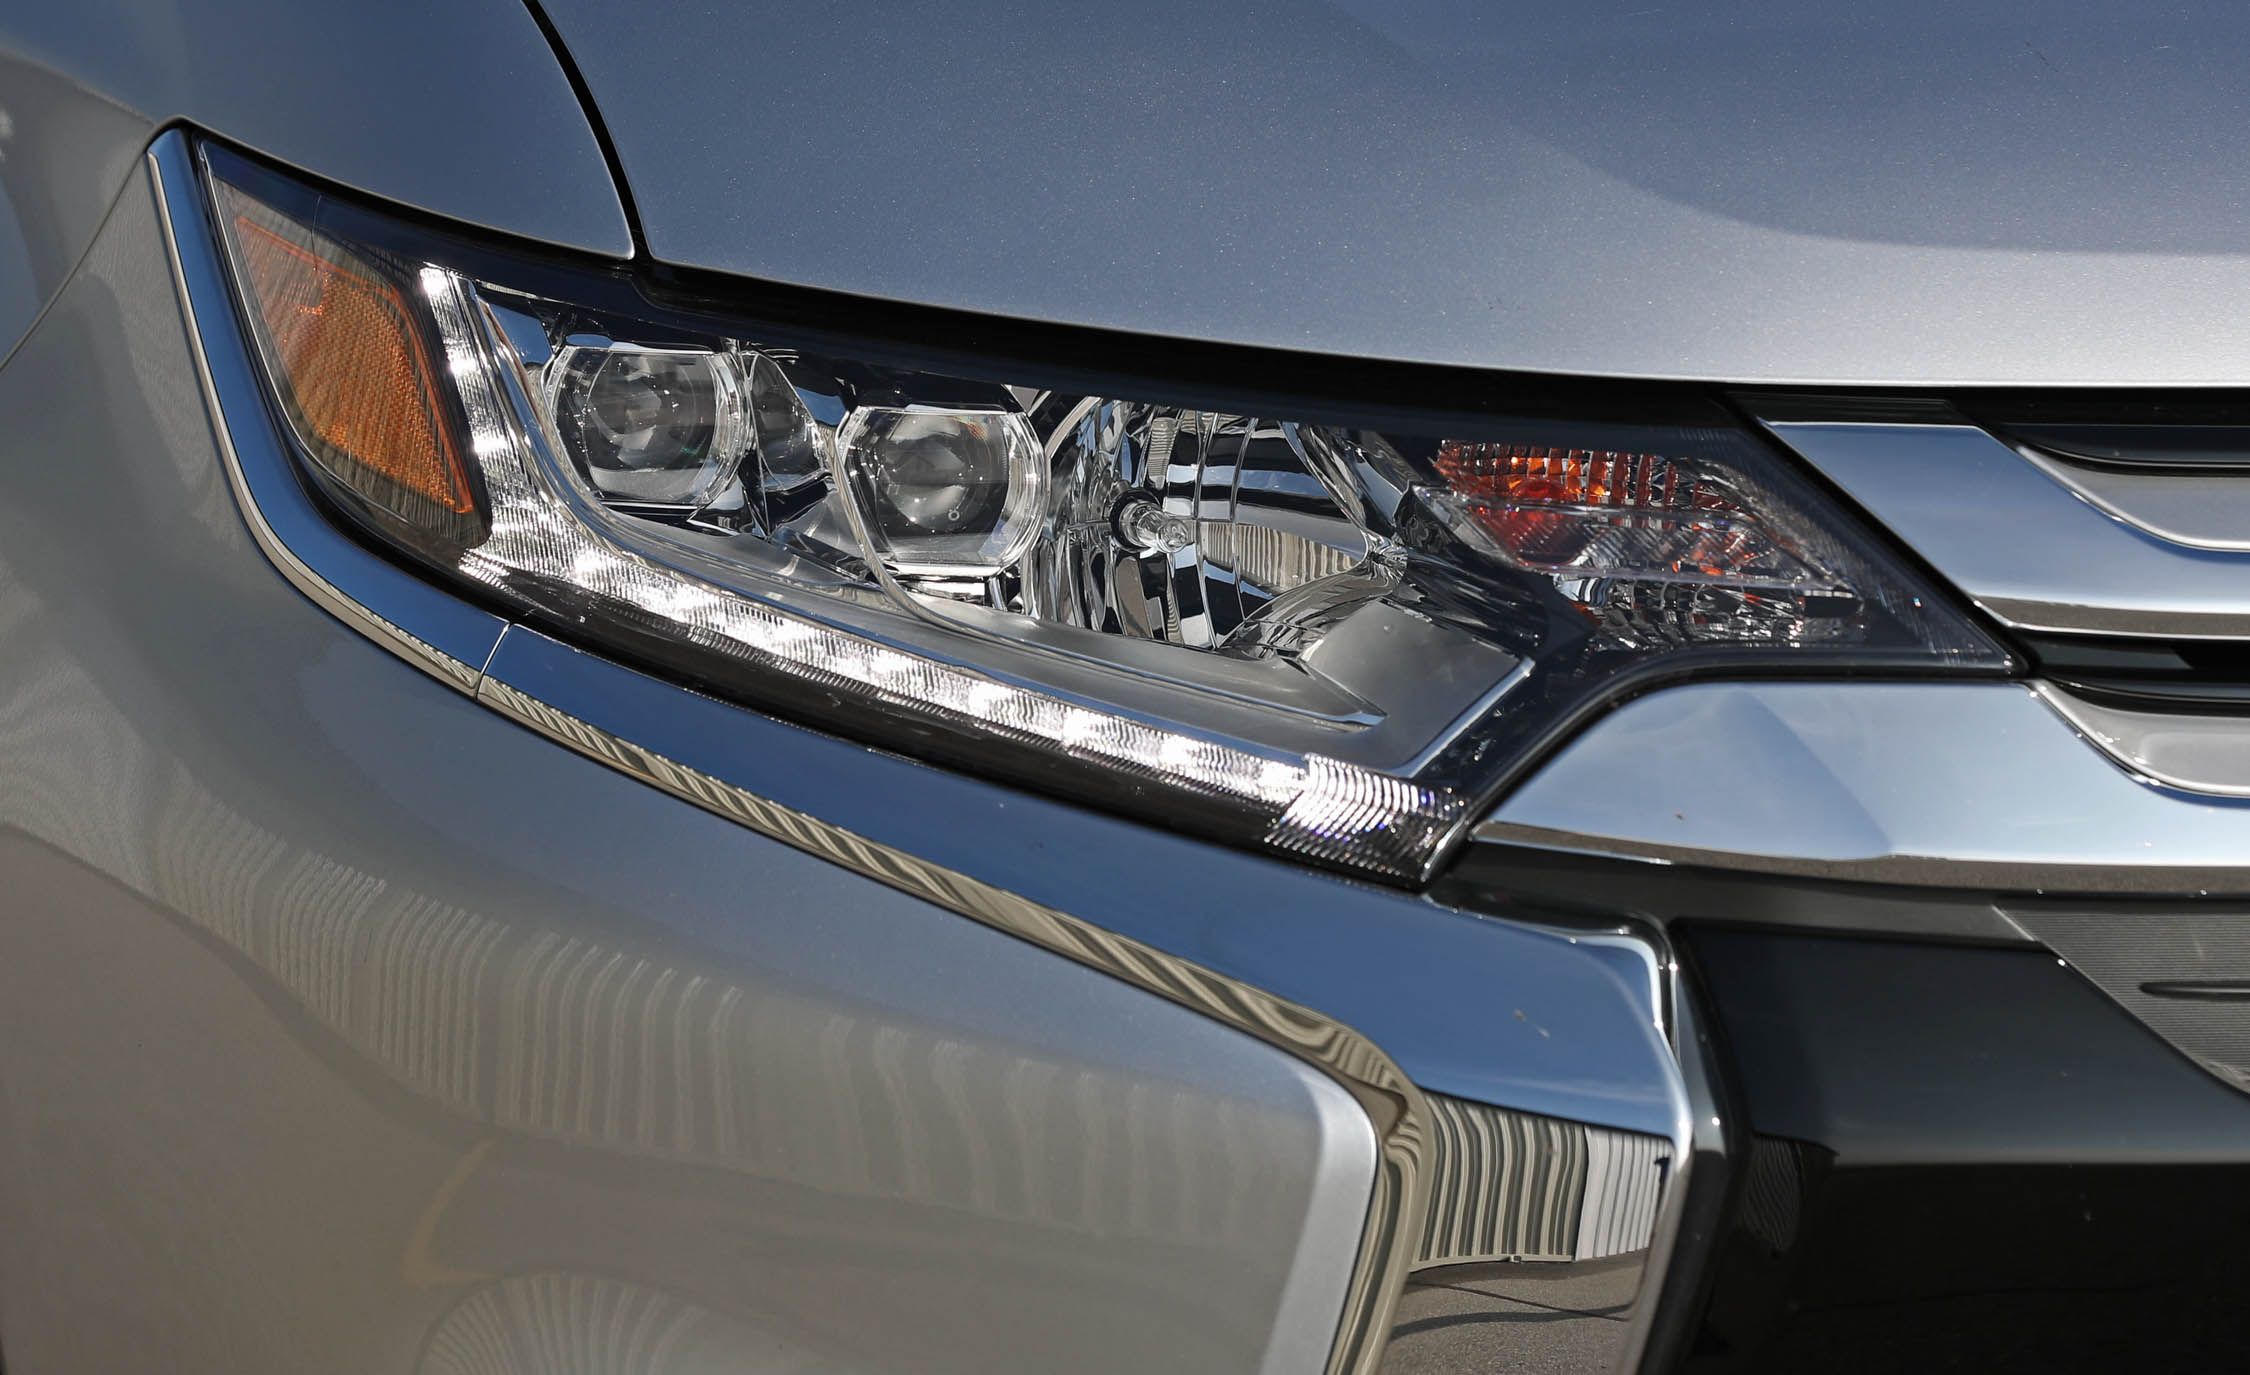 2017 Mitsubishi Outlander Gt Exterior View Headlight (View 30 of 34)